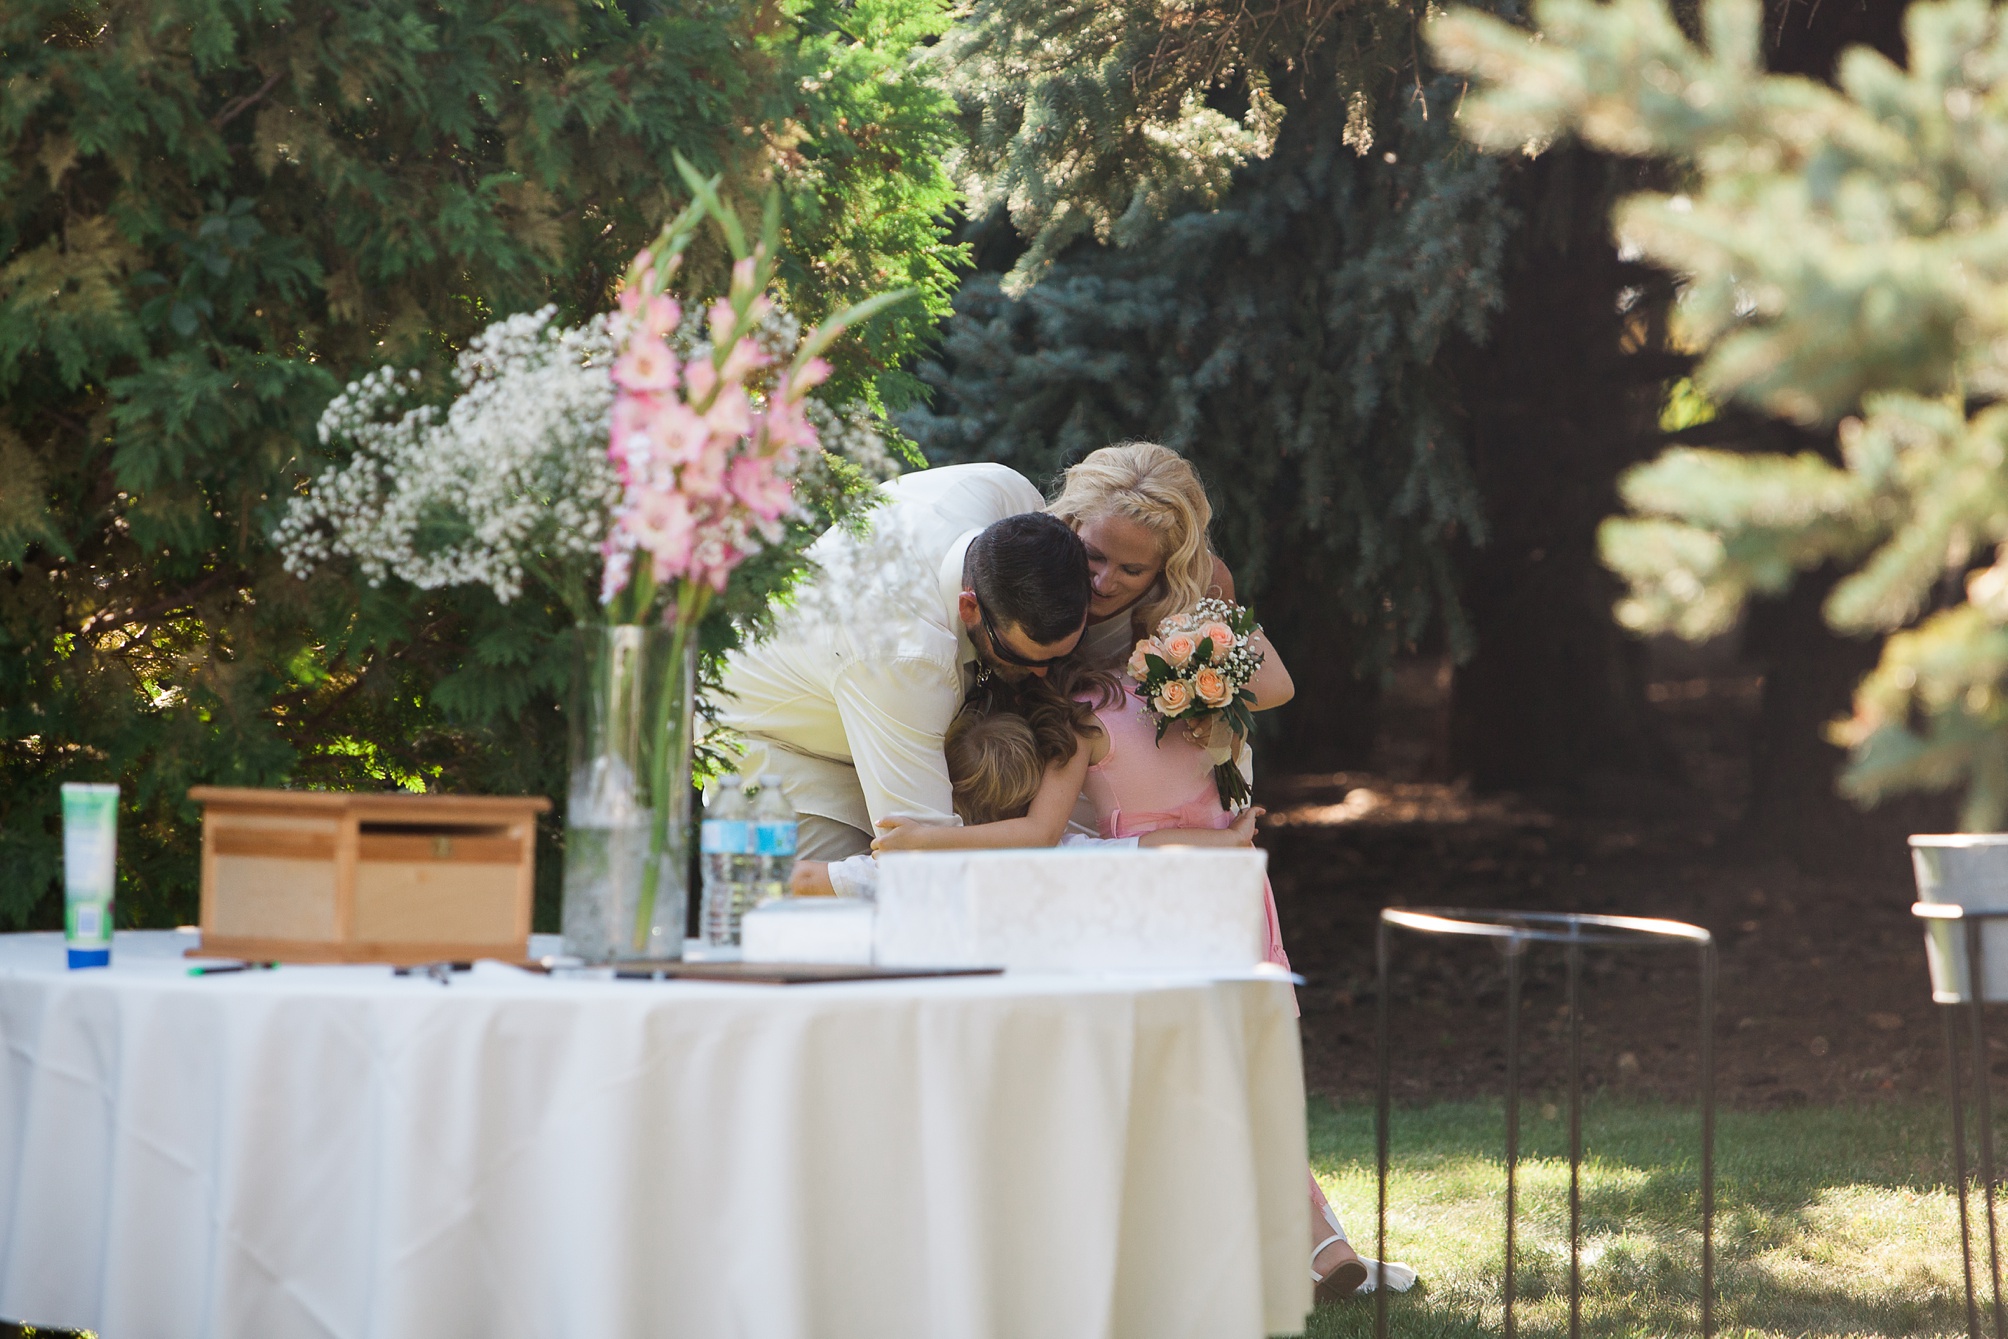 Sweet family moment at this Casual pink and white backyard wedding 